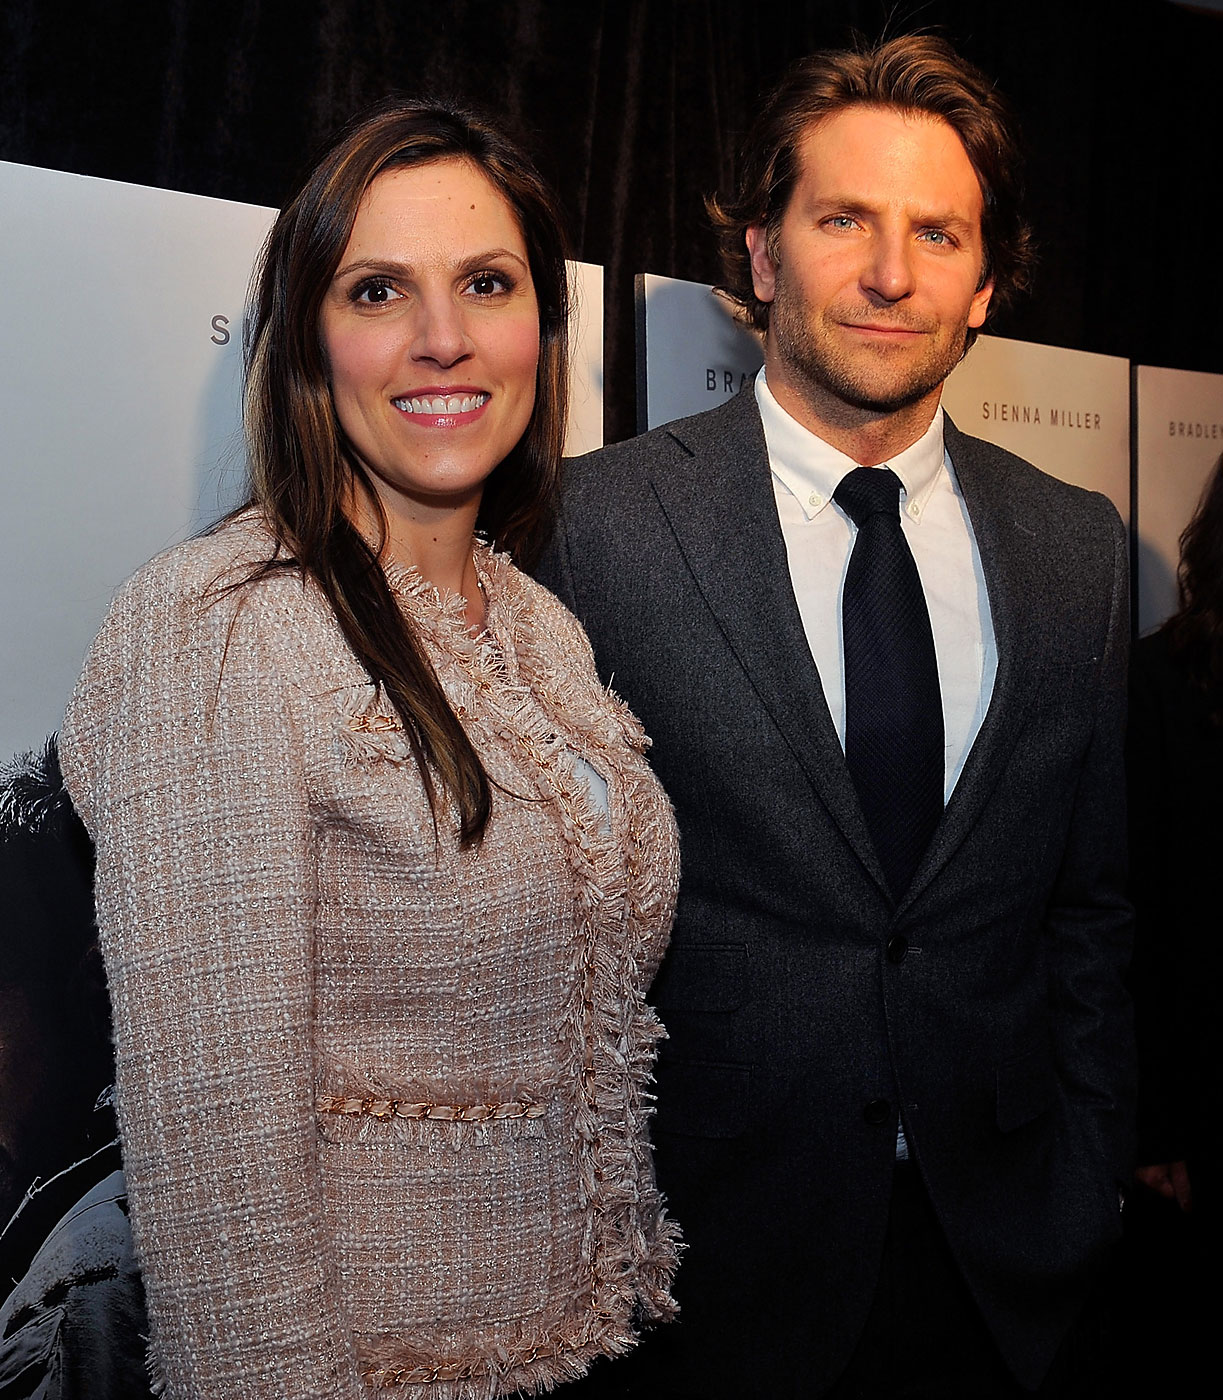 Taya Kyle, left, and Bradley Cooper attend the opening of <i>American Sniper</i> at the Burke Theater at the U.S. Navy Memorial on Jan. 13, 2015 in Washington, DC. (Larry French—Getty Images)